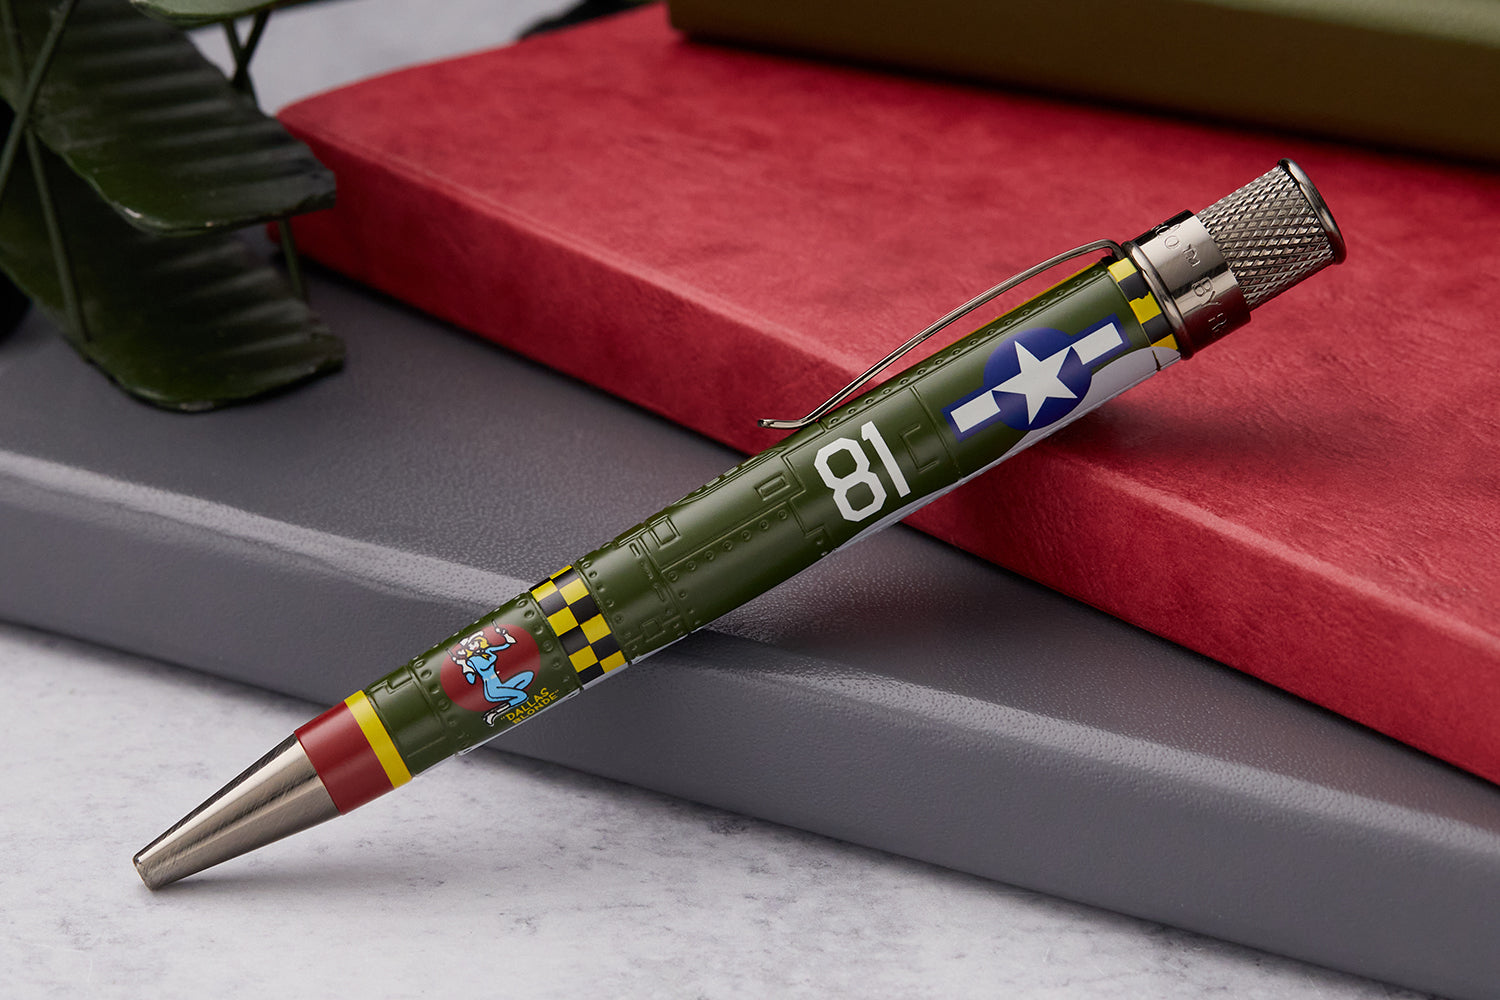 These Offensive Office Pens Are The Perfect Way To Get Back At